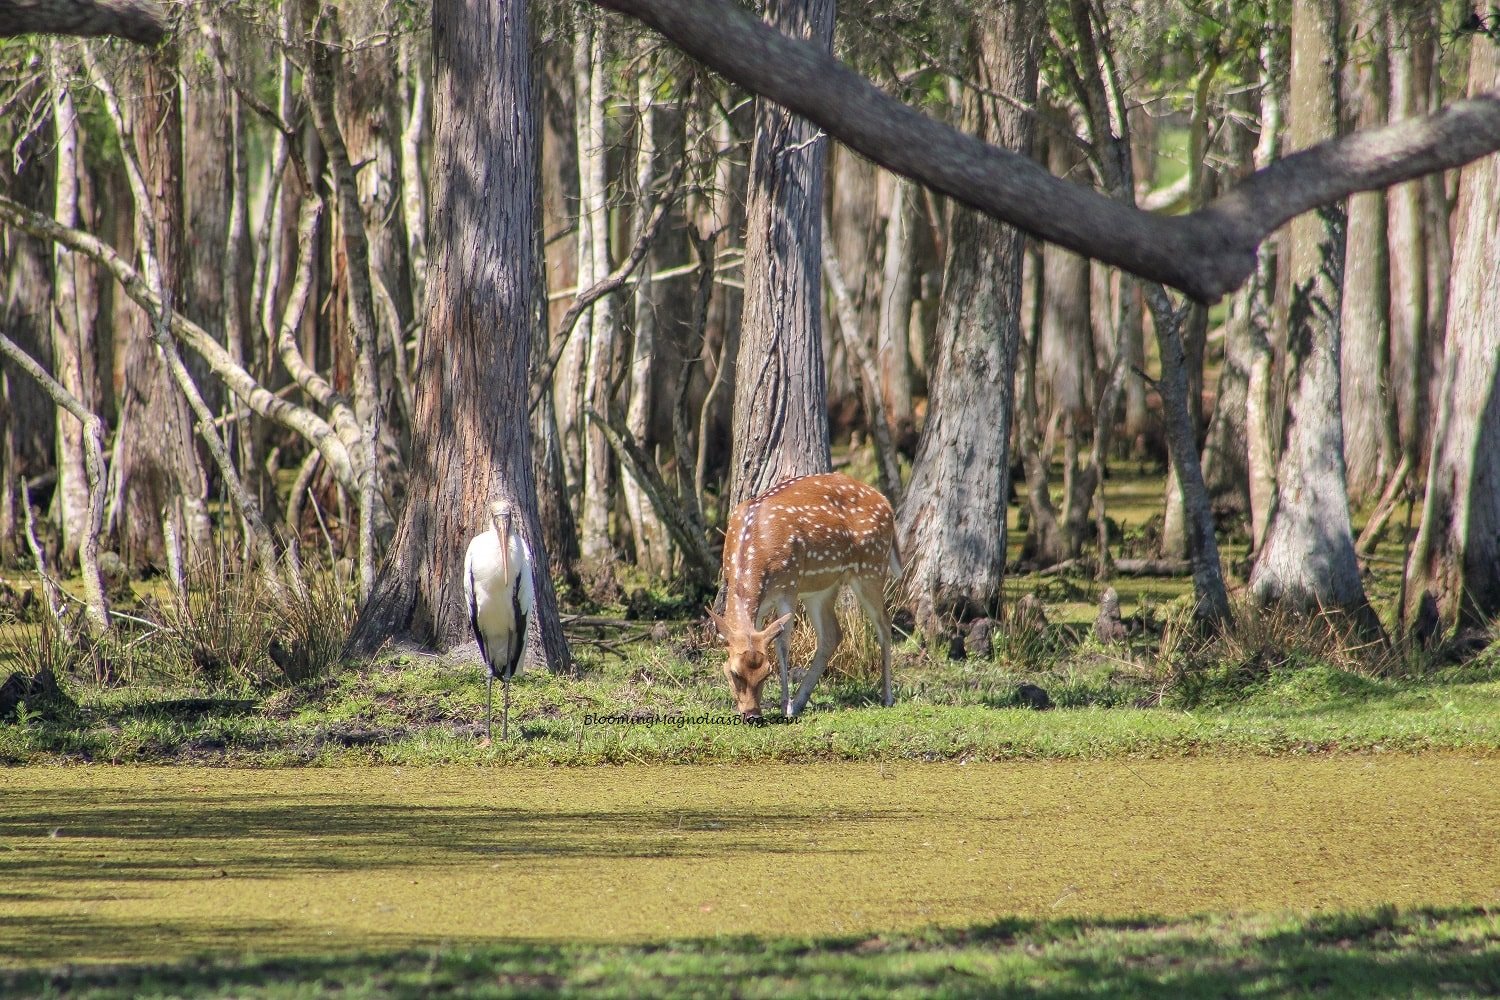 Wild Florida, a drive-through safari park, and more | Blooming Magnolias Blog | Travel, Florida Travel, Spotted deer